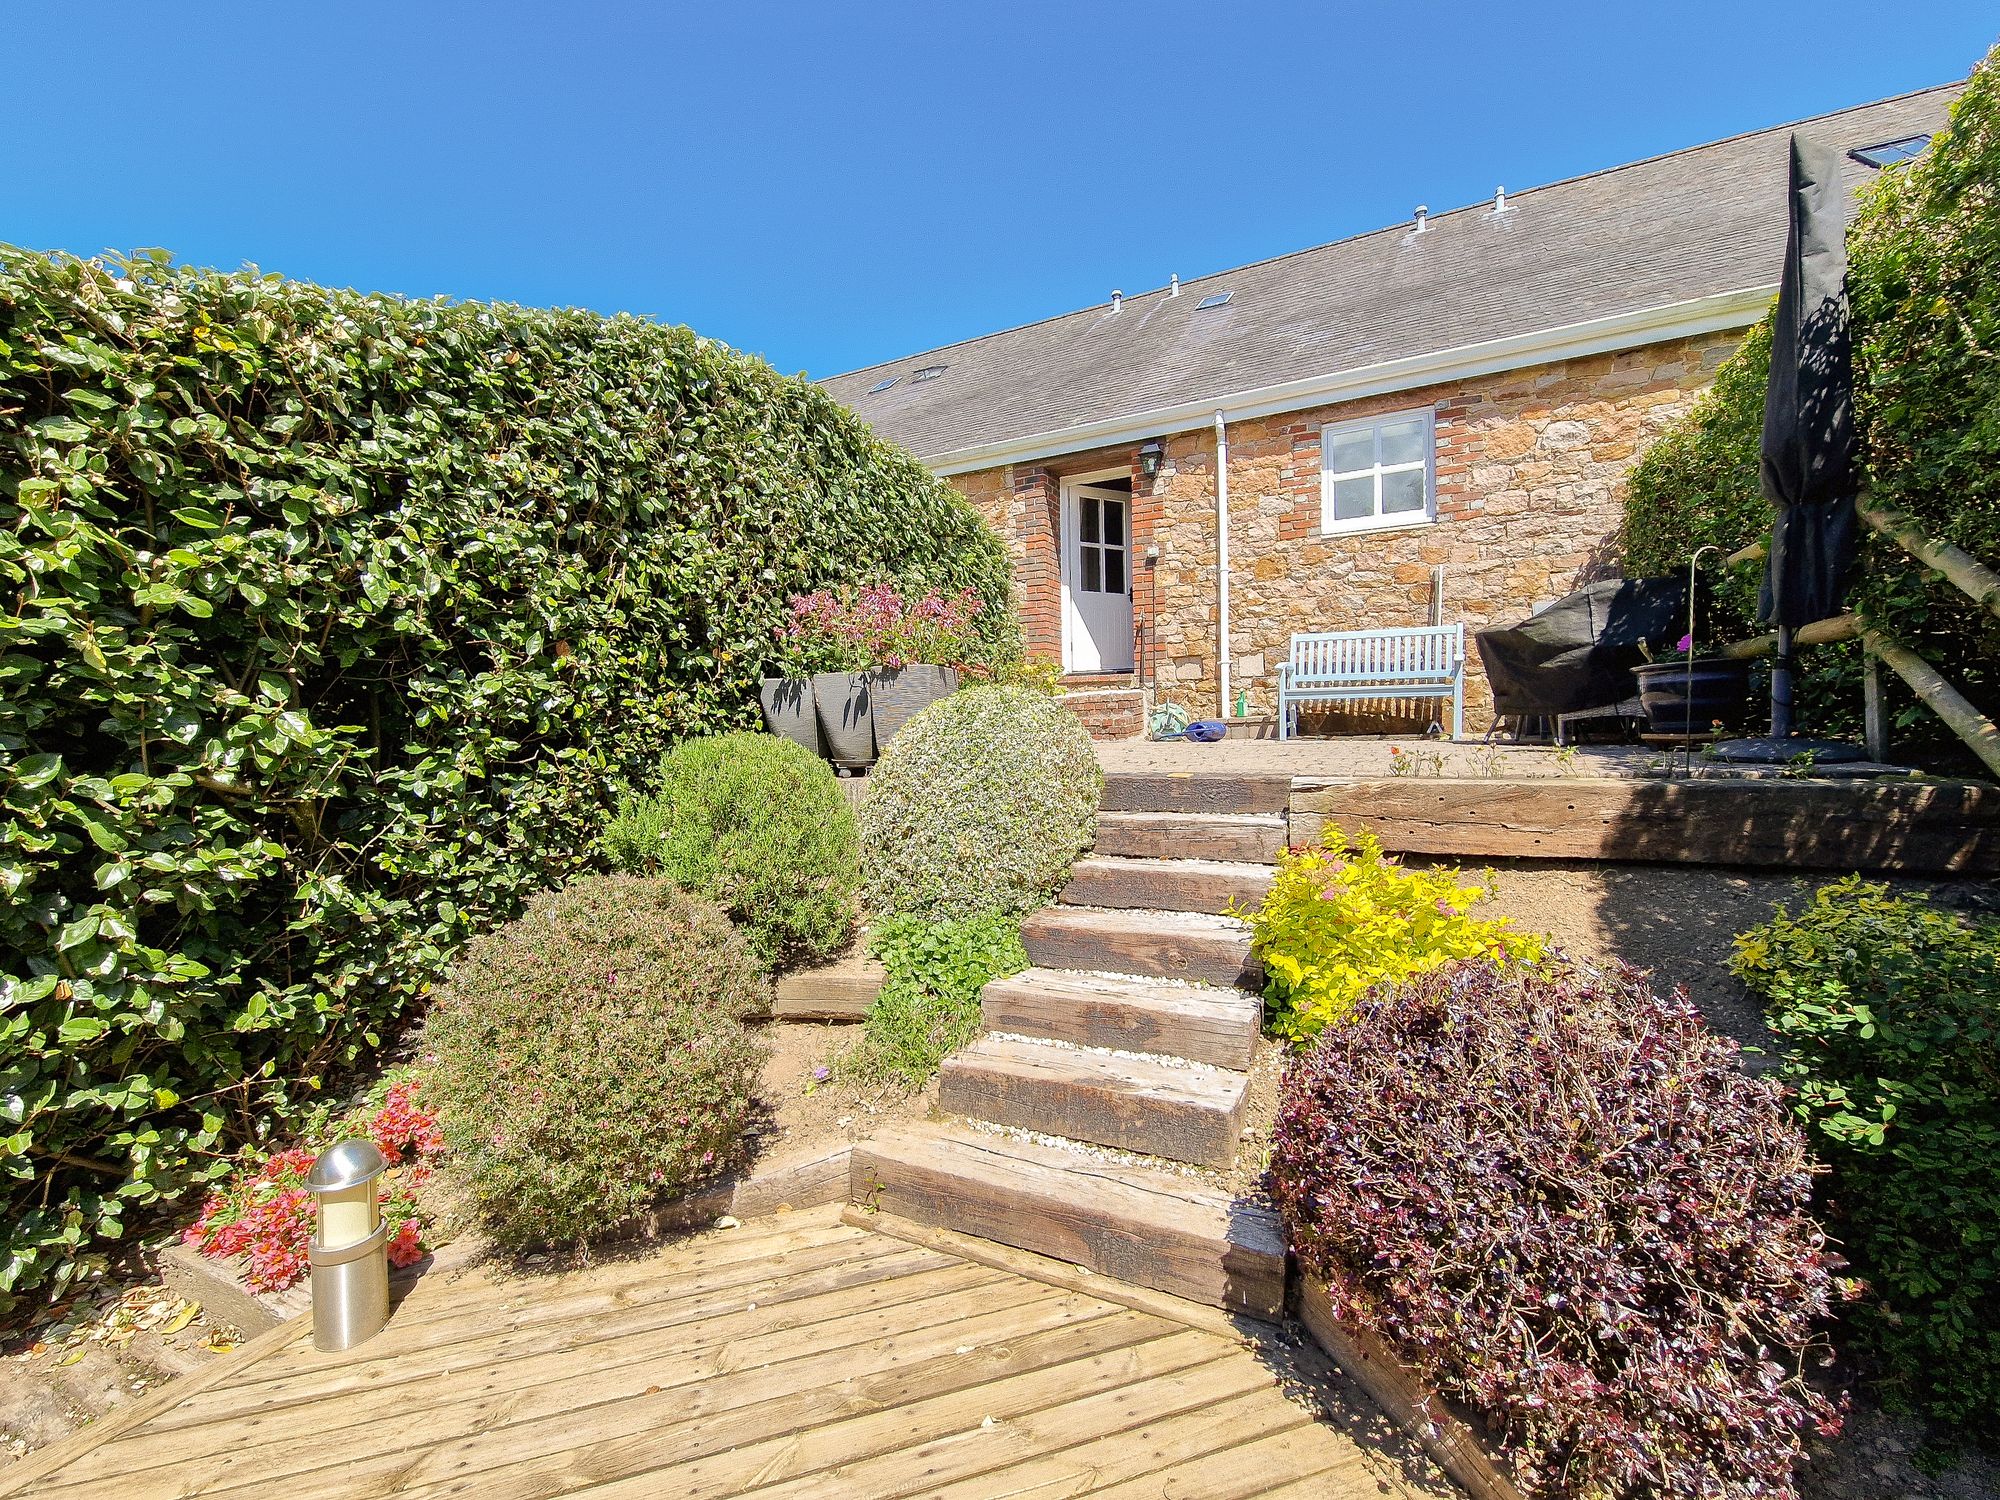 3 bed Property For Sale in Trinity, Jersey